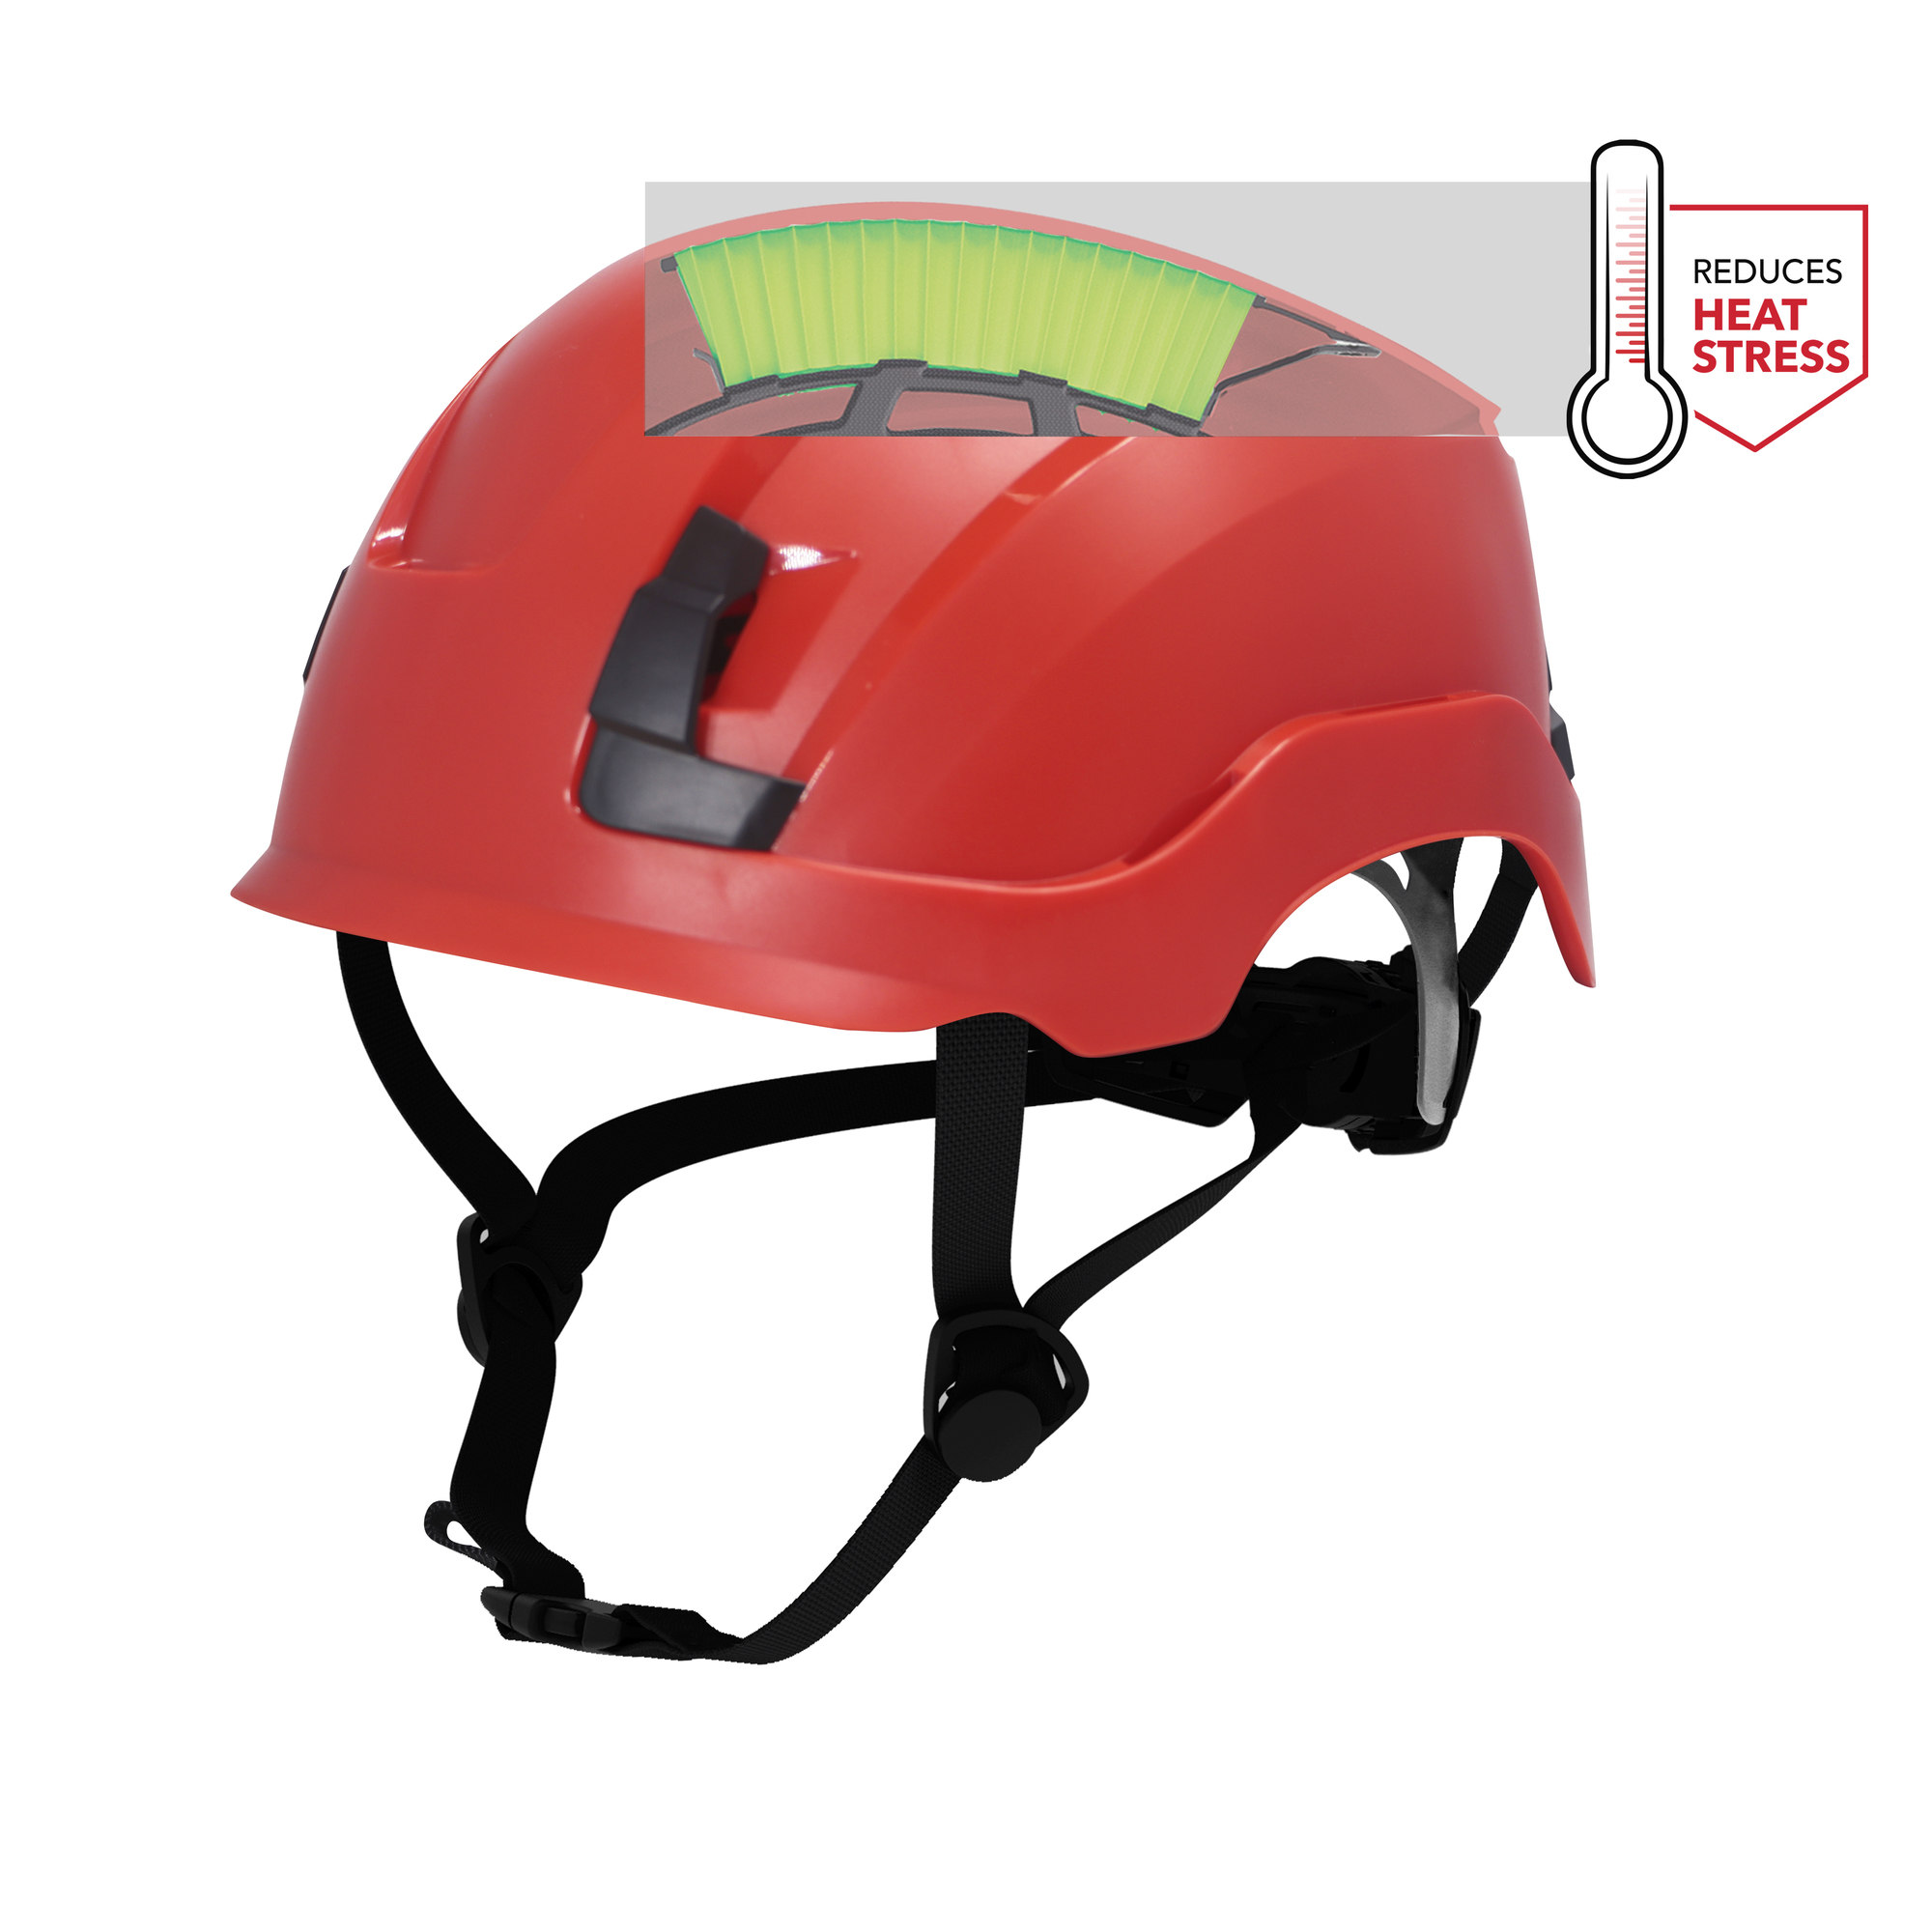 General Electric, Low-Profile Red GH401 Safety Helmet Non Vented, Hard Hat Style Helmet, Hat Size Adjustable, Color Red, Model GH401R